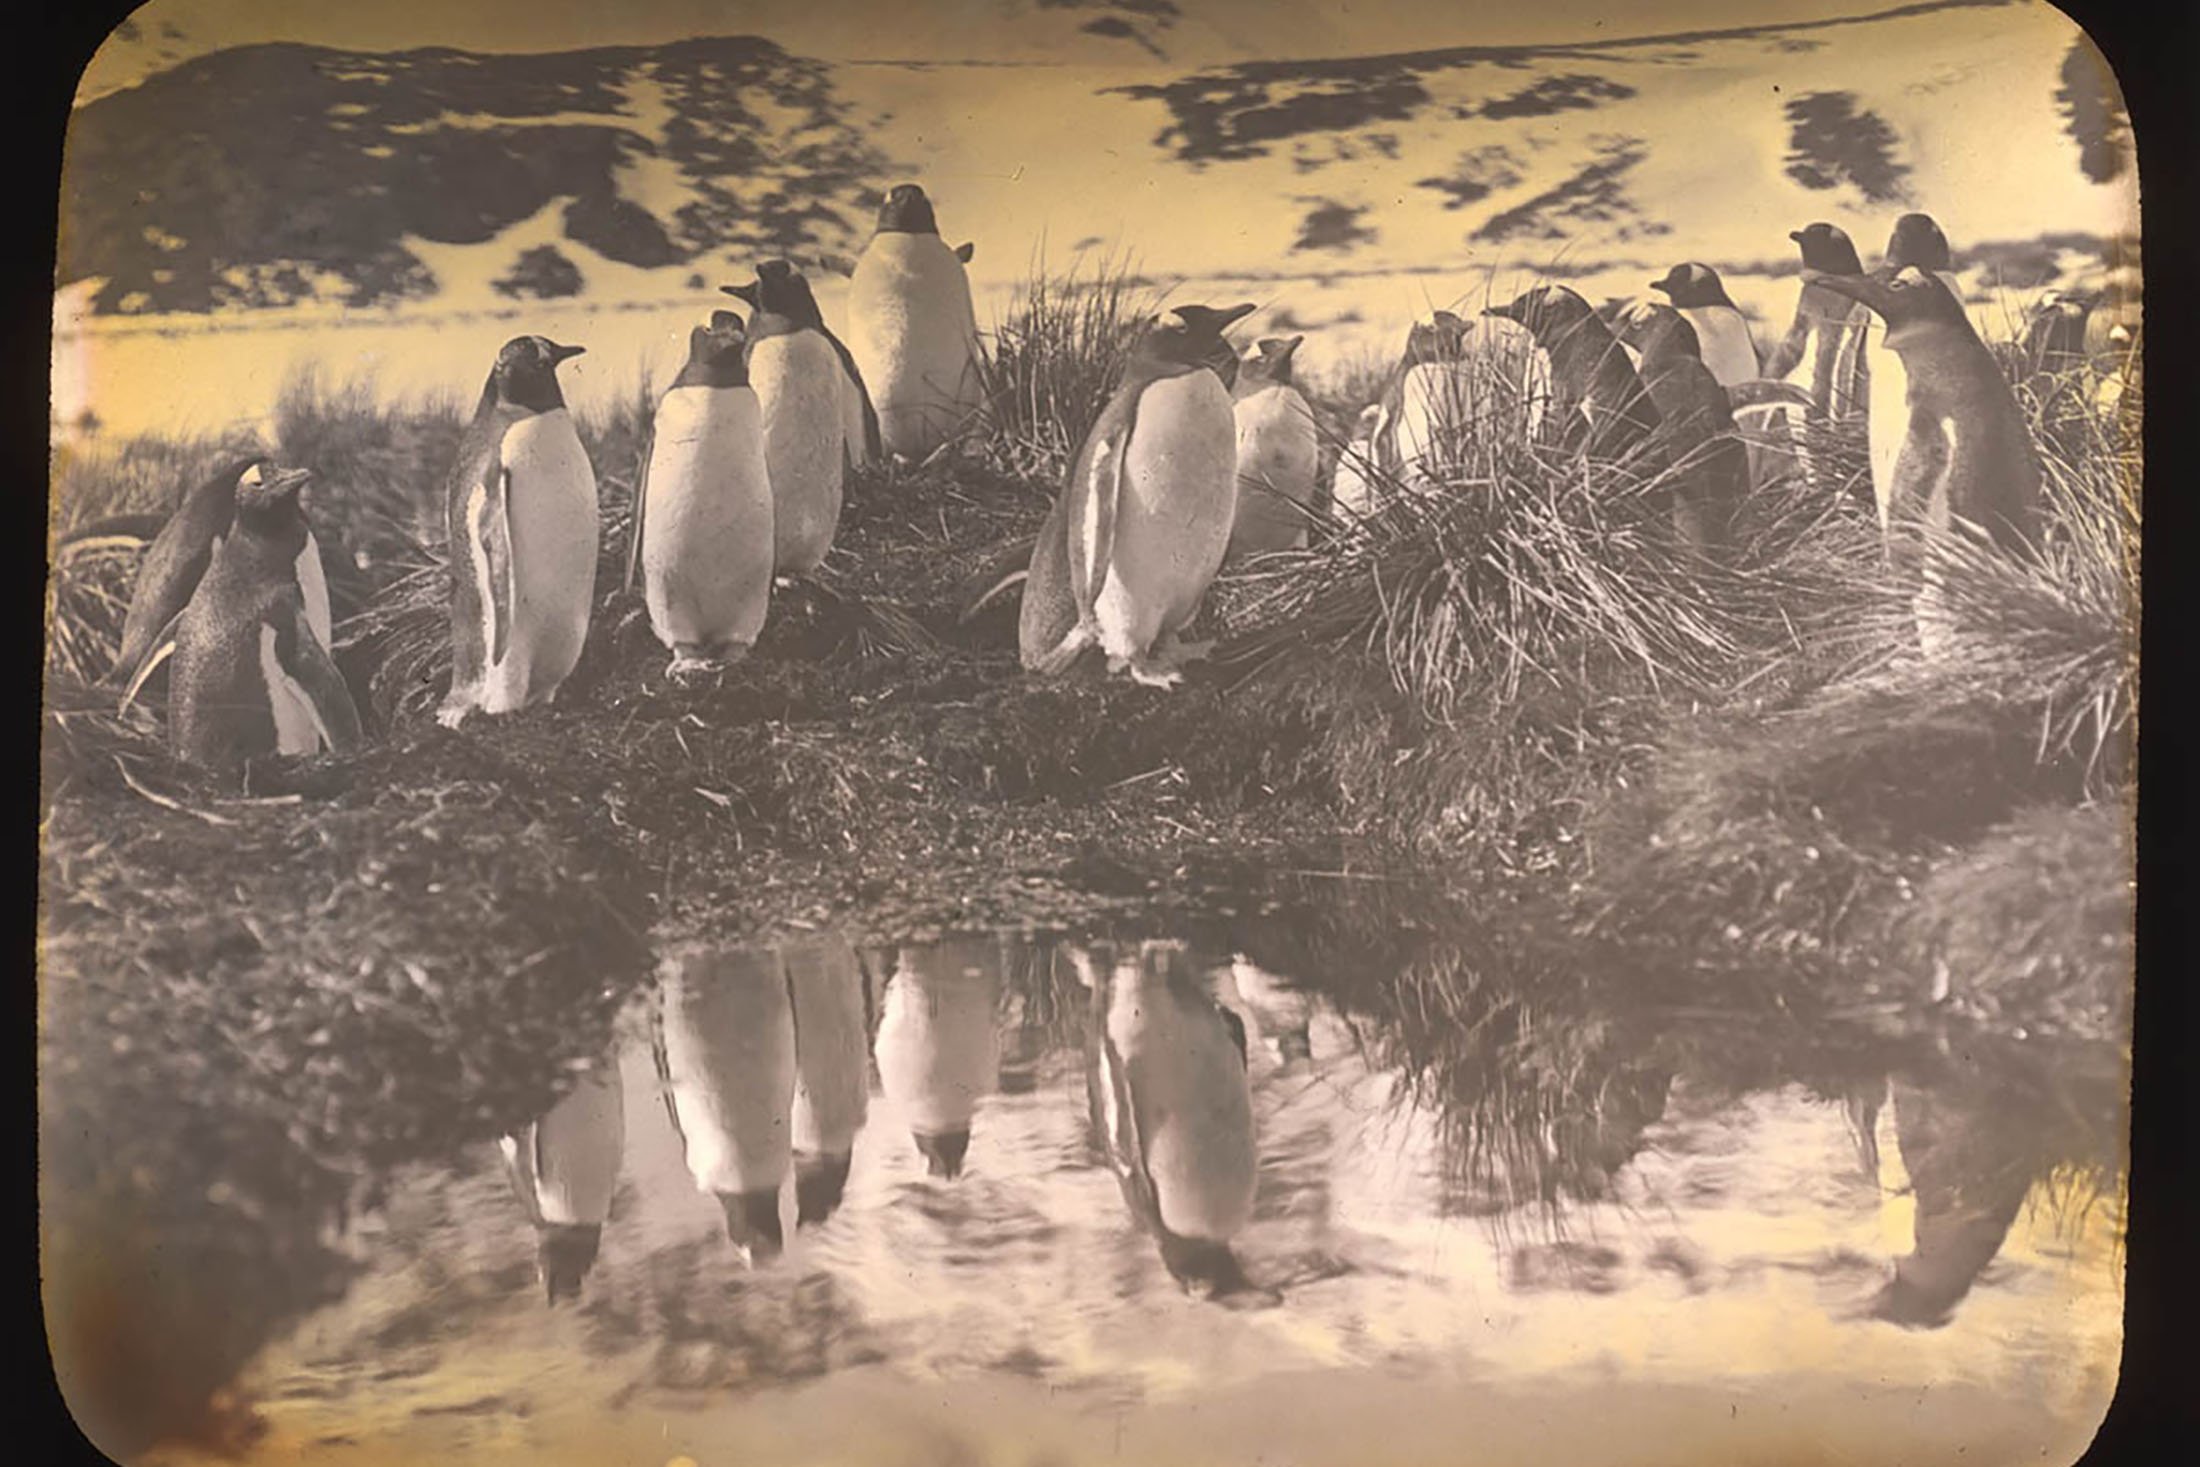 Penguins can be seen in South Georgia. (Photo courtesy of New South Wales State Library)